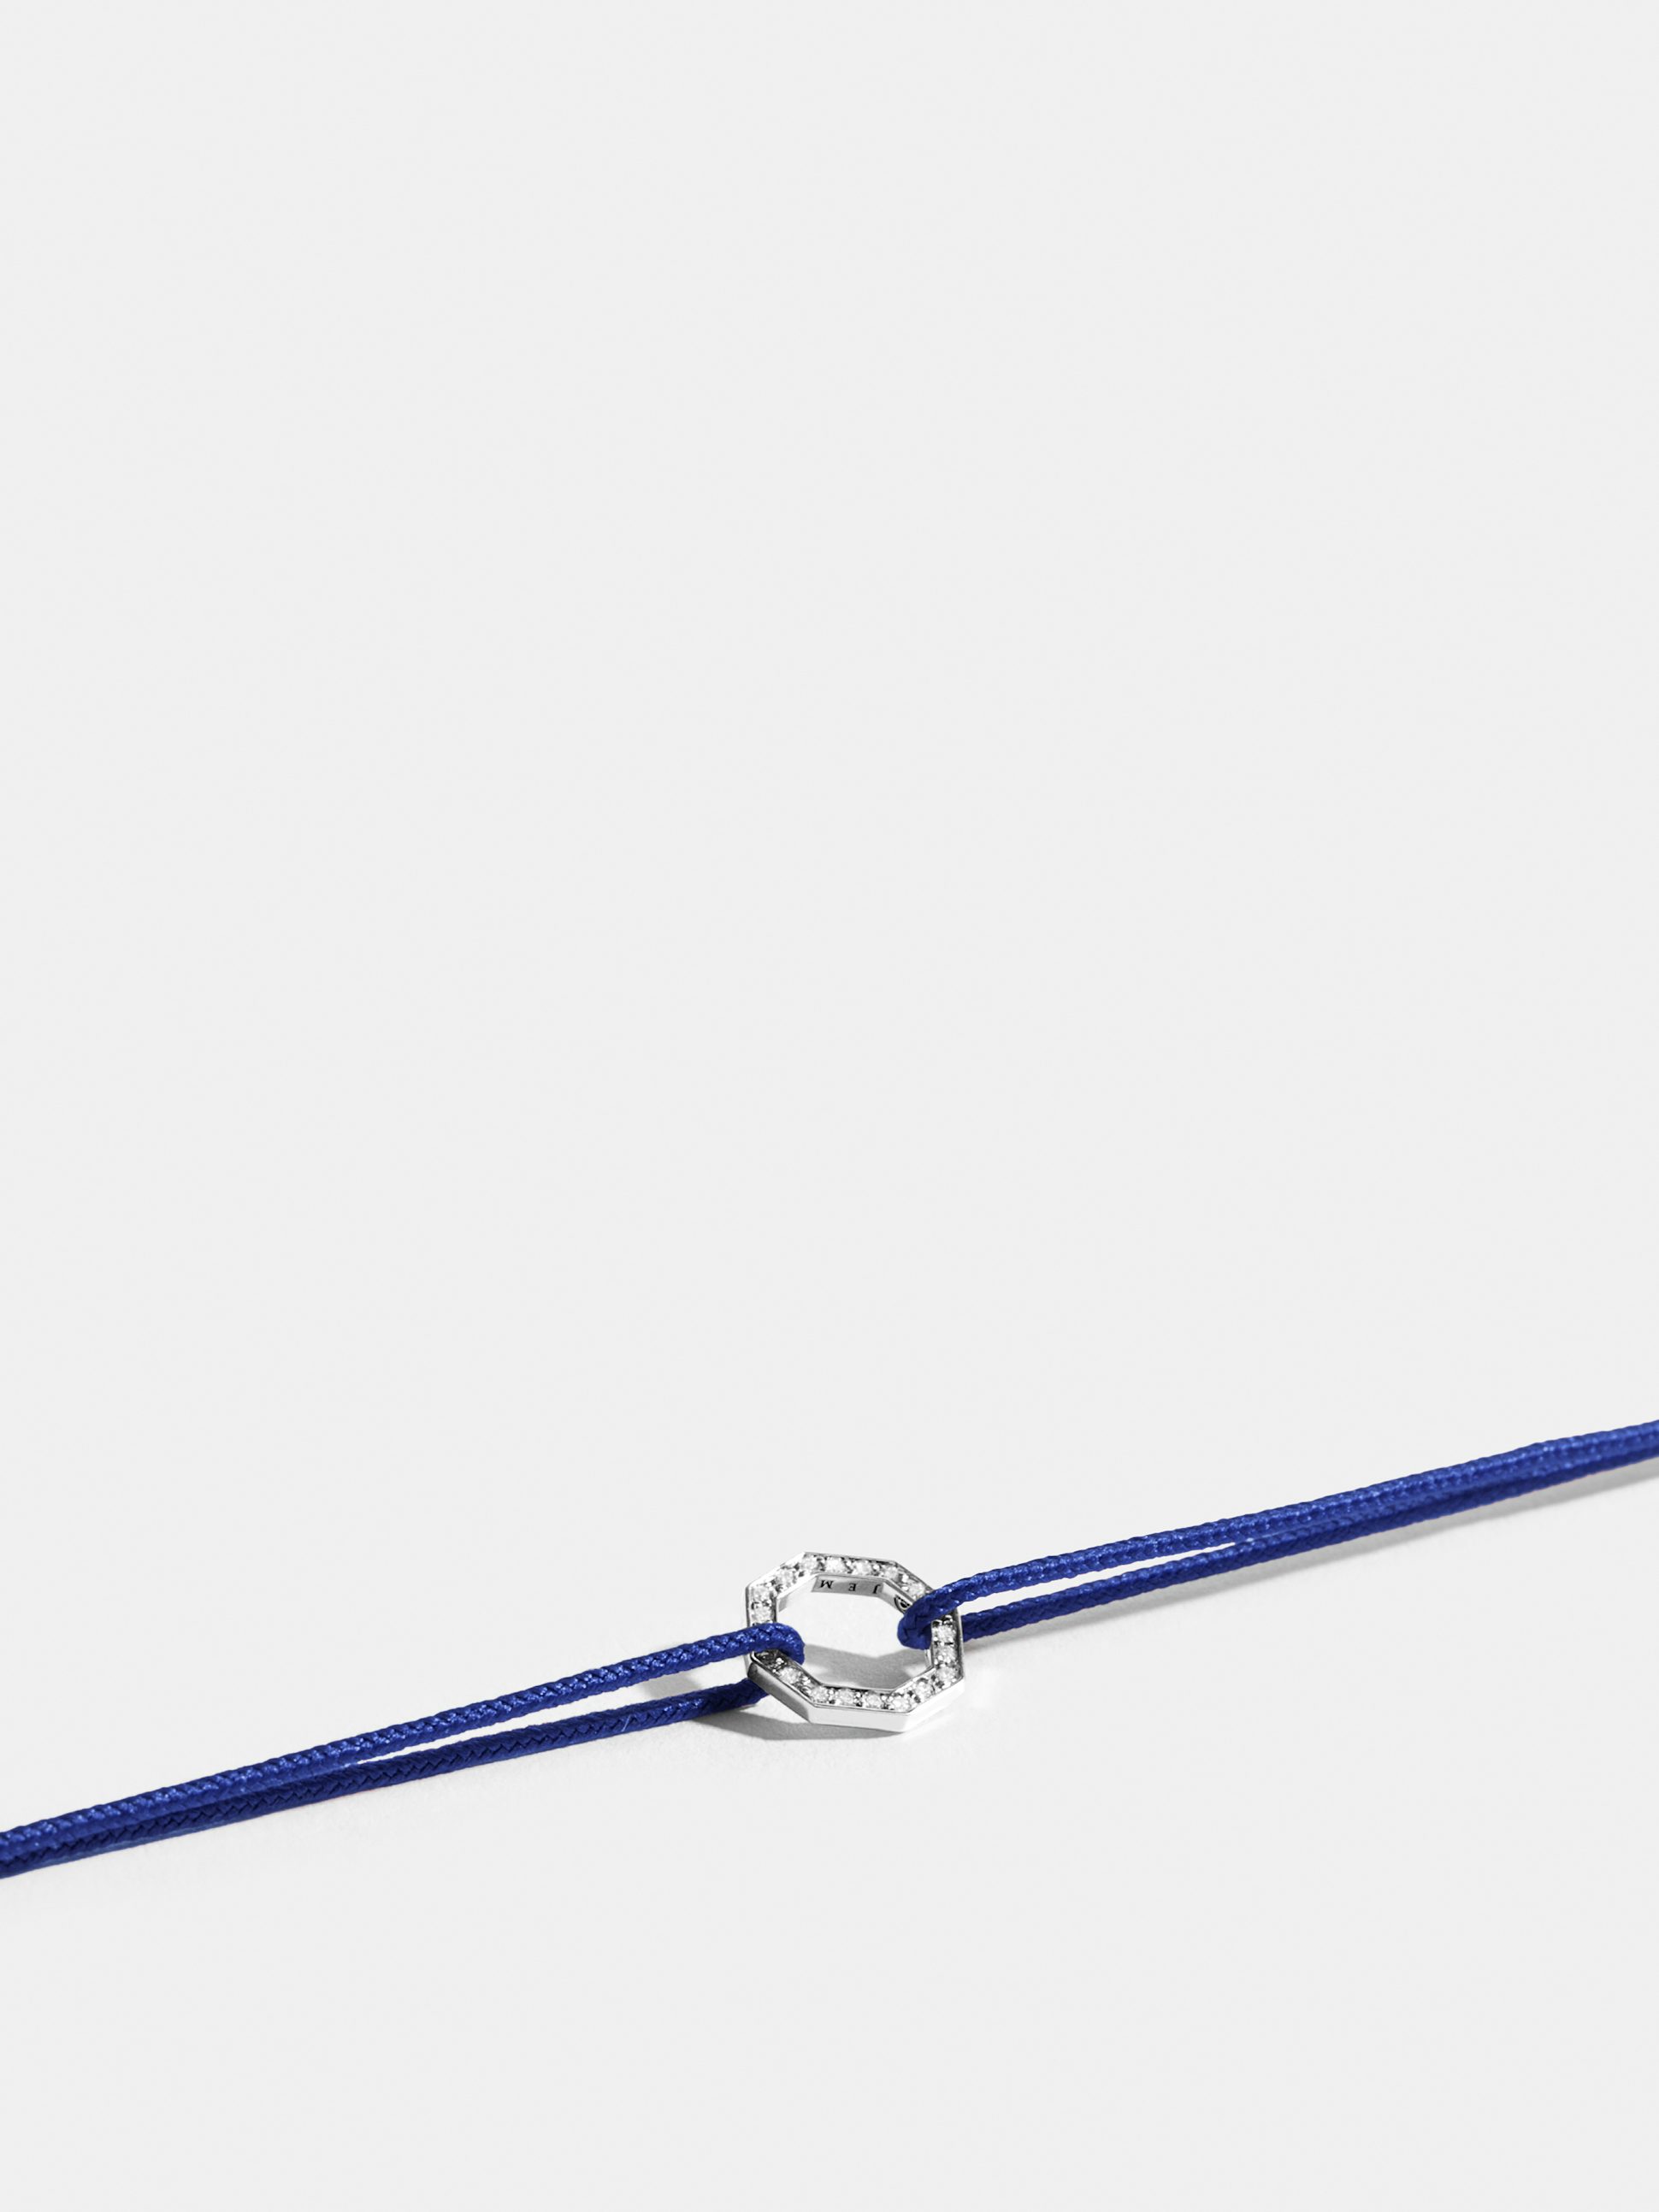 Octogone motif in 18k Fairmined ethical white gold, paved with lab-grown diamonds, on a klein blue cord.